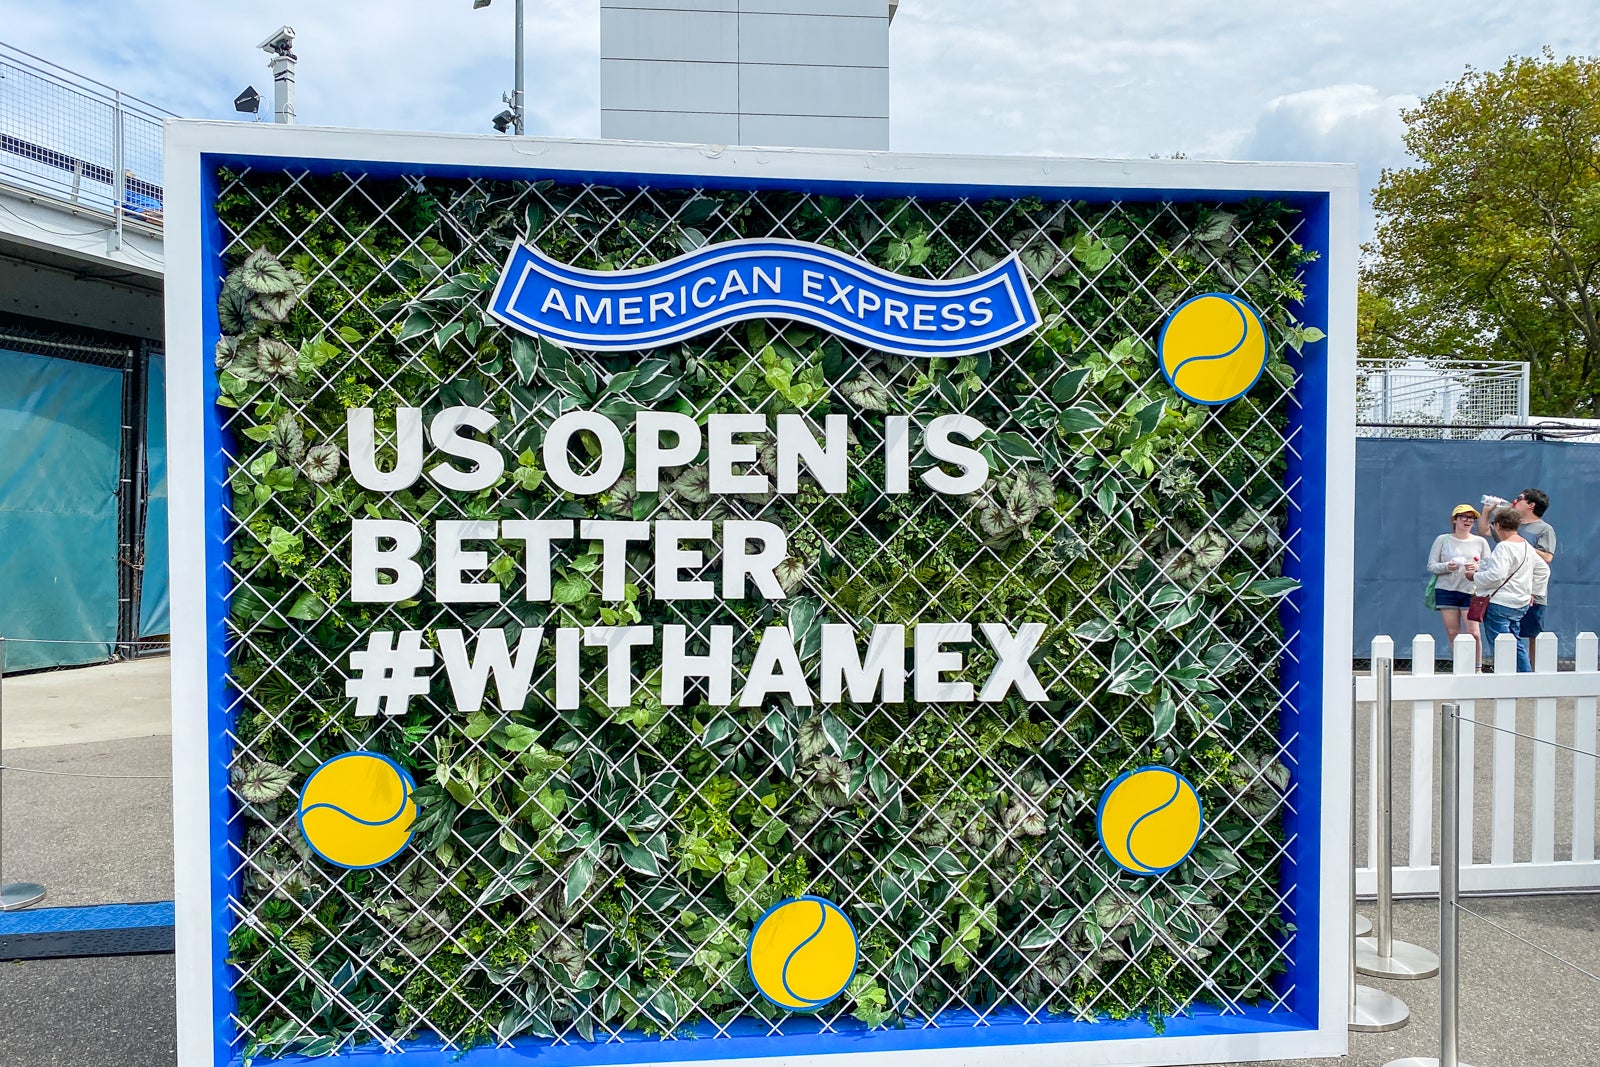 TPG takes the US Open We put Chase and Amex perks headtohead at this